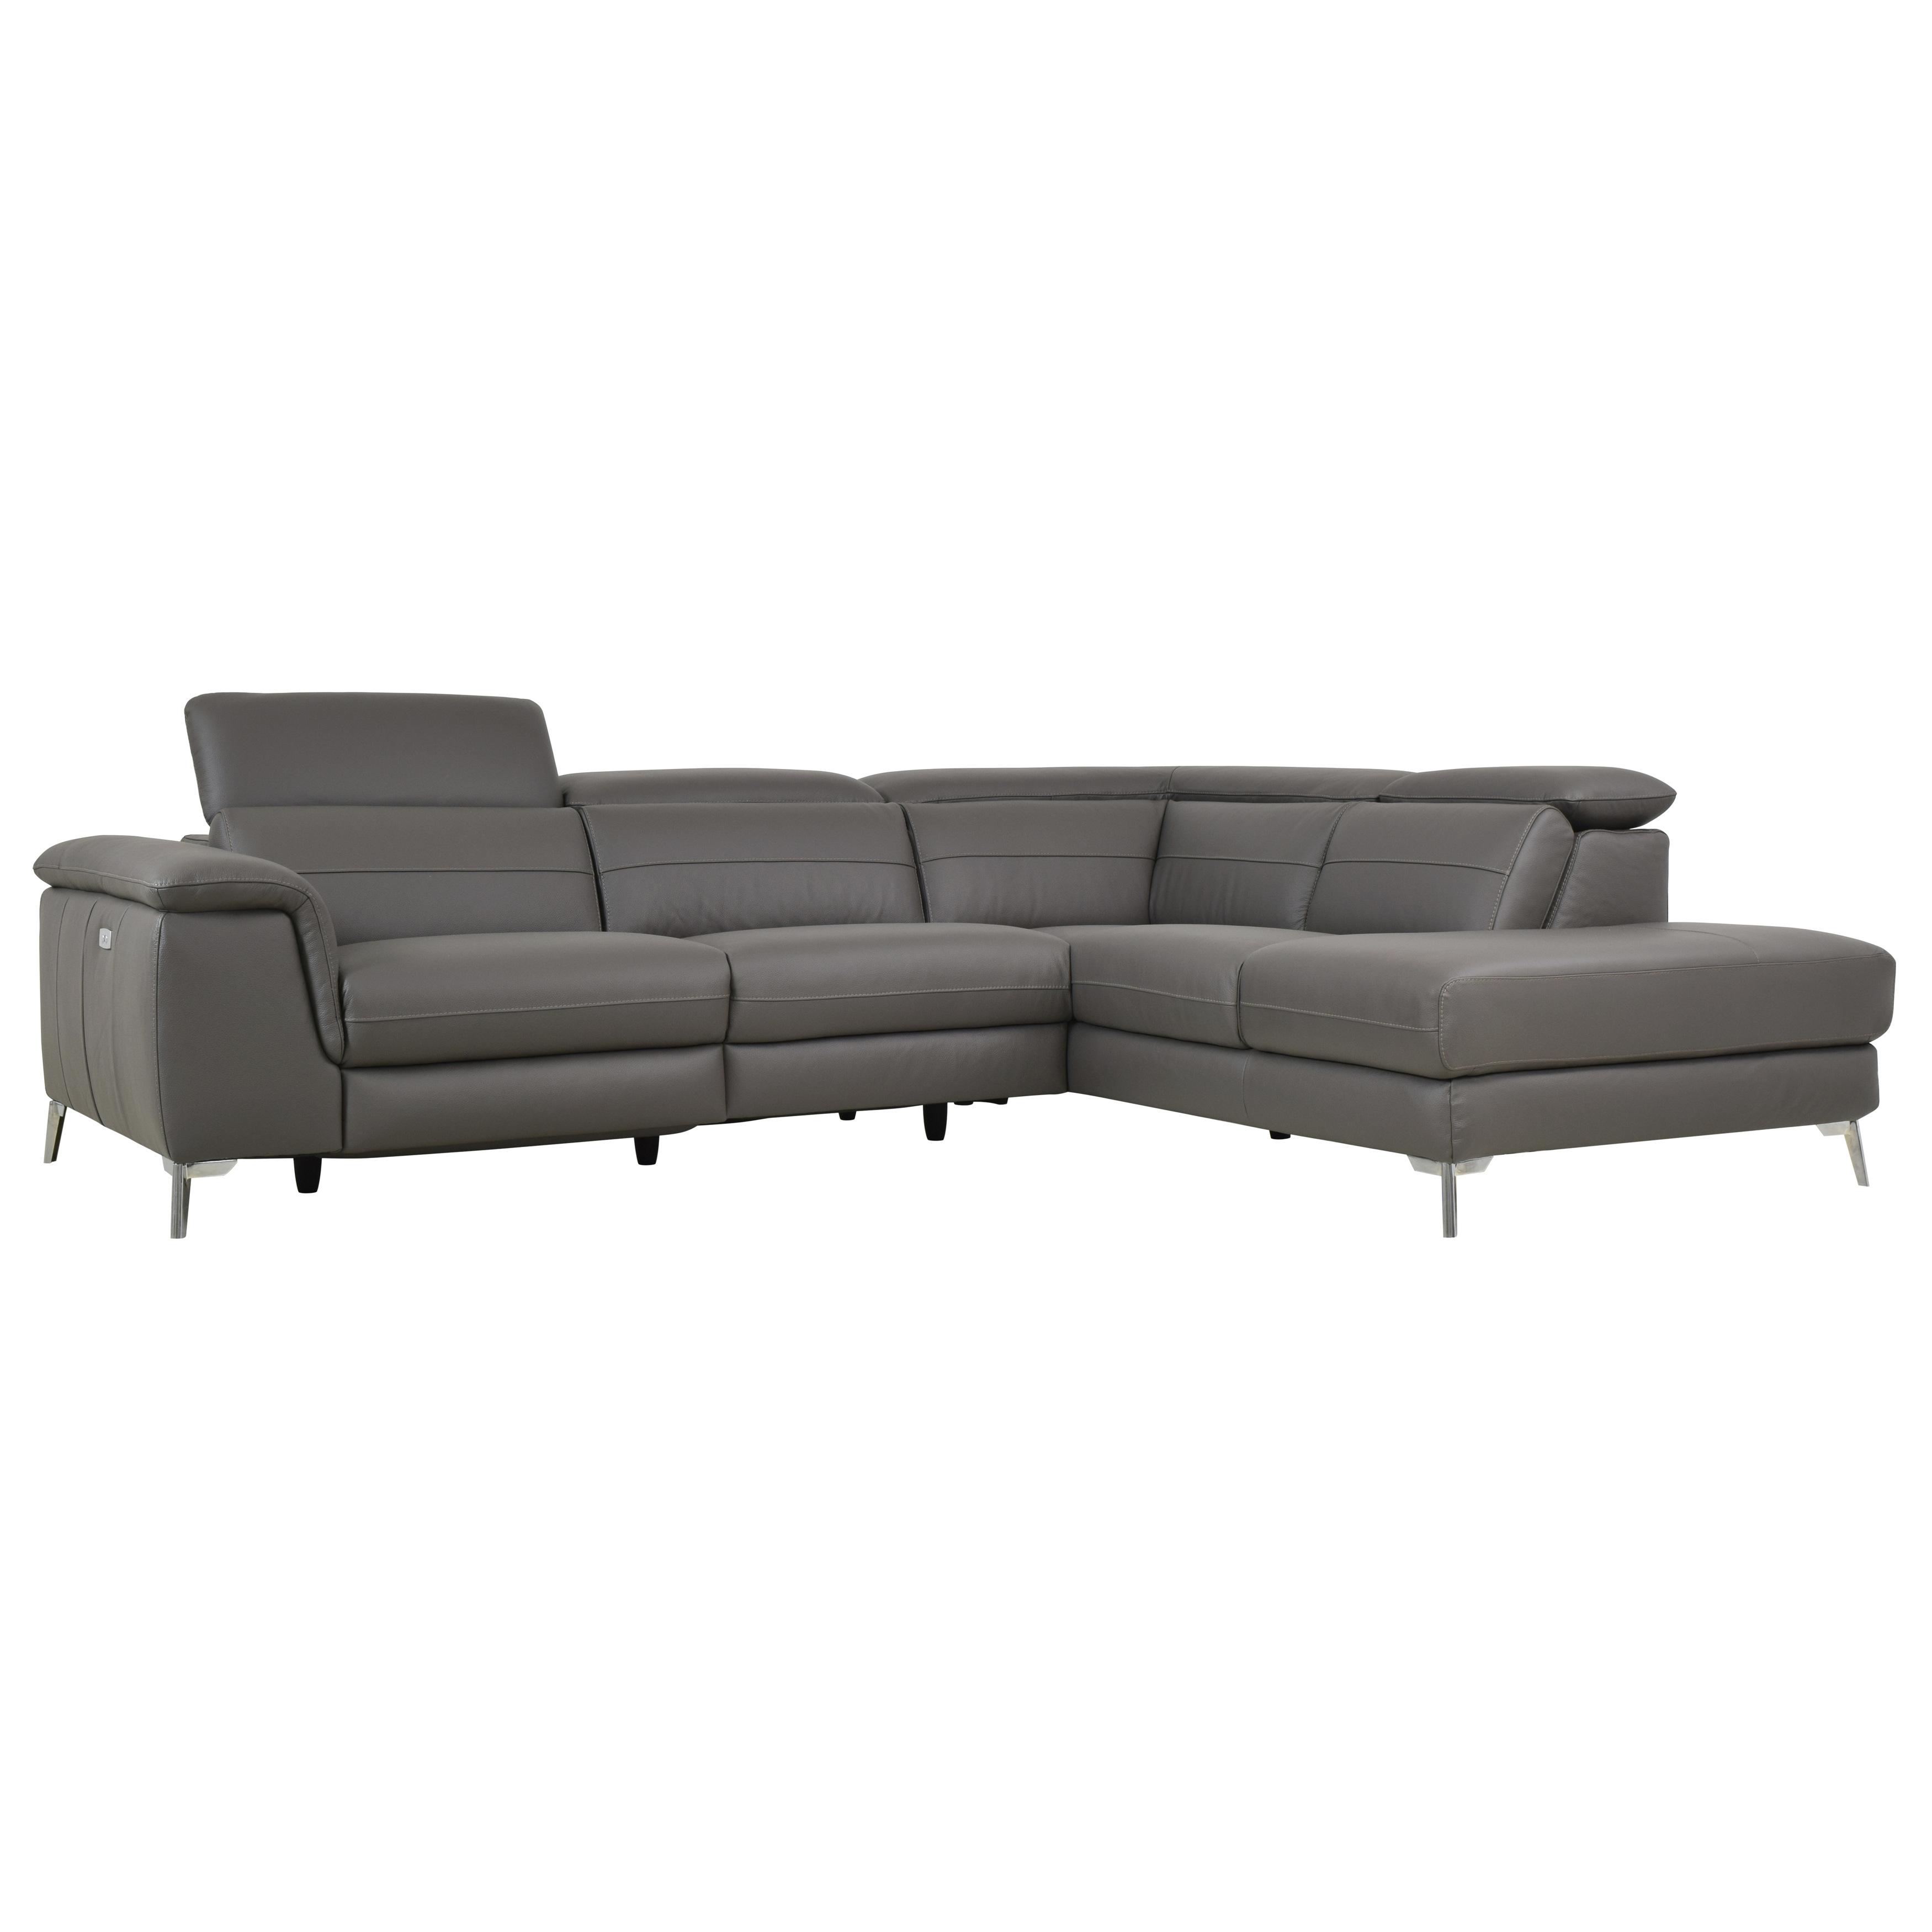 

    
Contemporary Dark Gray Leather 2-Piece Sectional Homelegance 8256M-GRY*2RLPW Cinque
